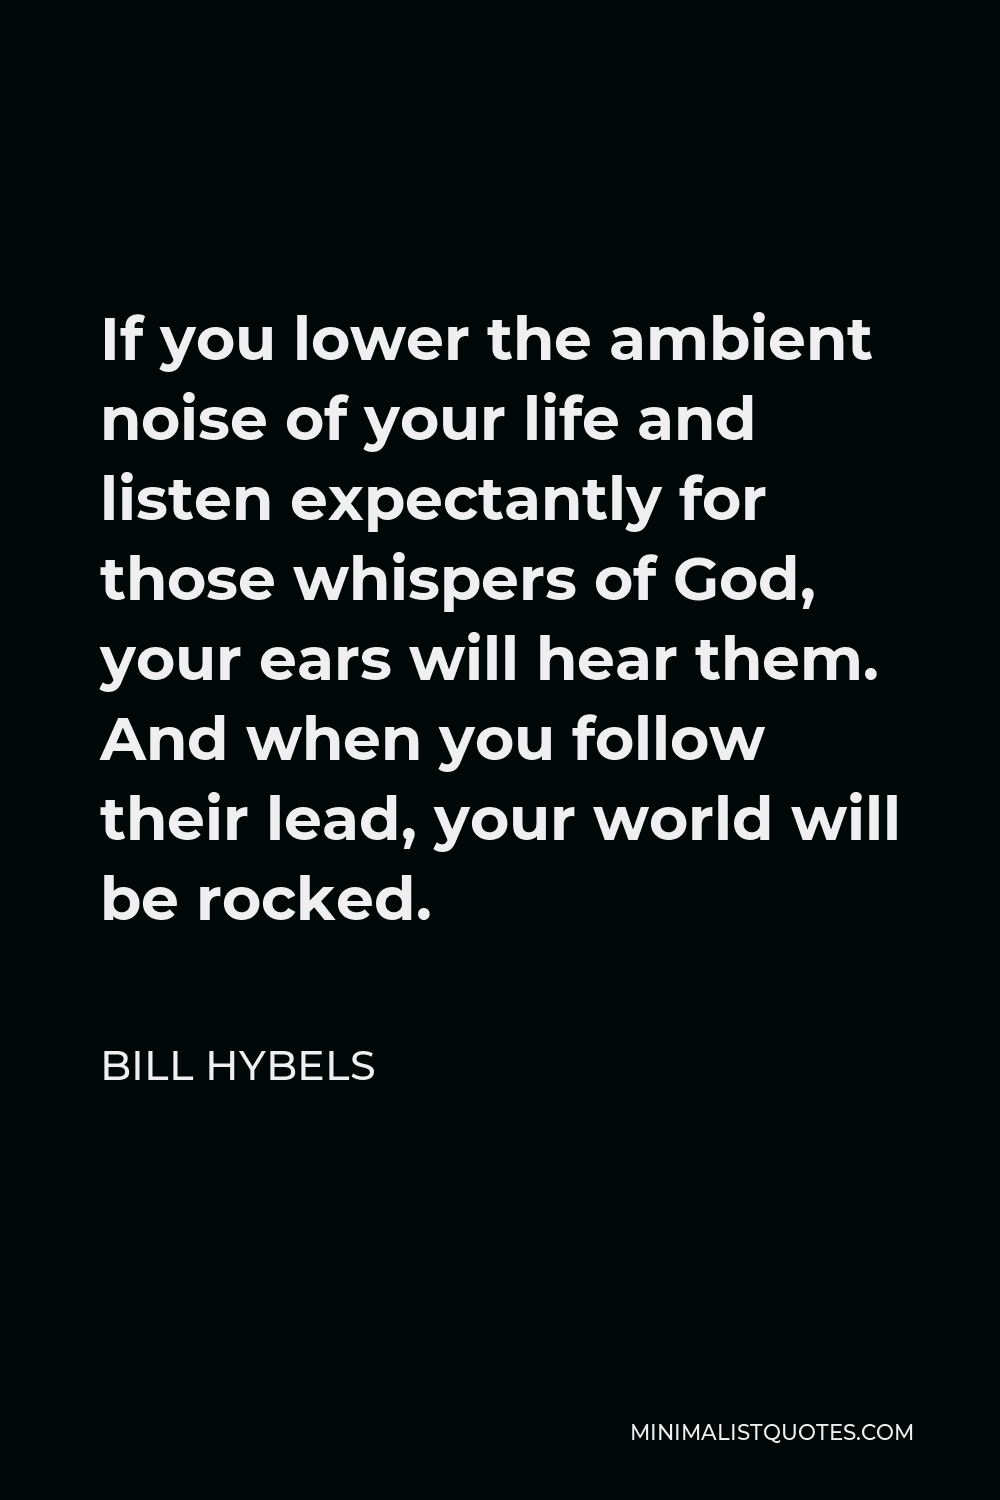 Bill Hybels Quote - If you lower the ambient noise of your life and listen expectantly for those whispers of God, your ears will hear them. And when you follow their lead, your world will be rocked.